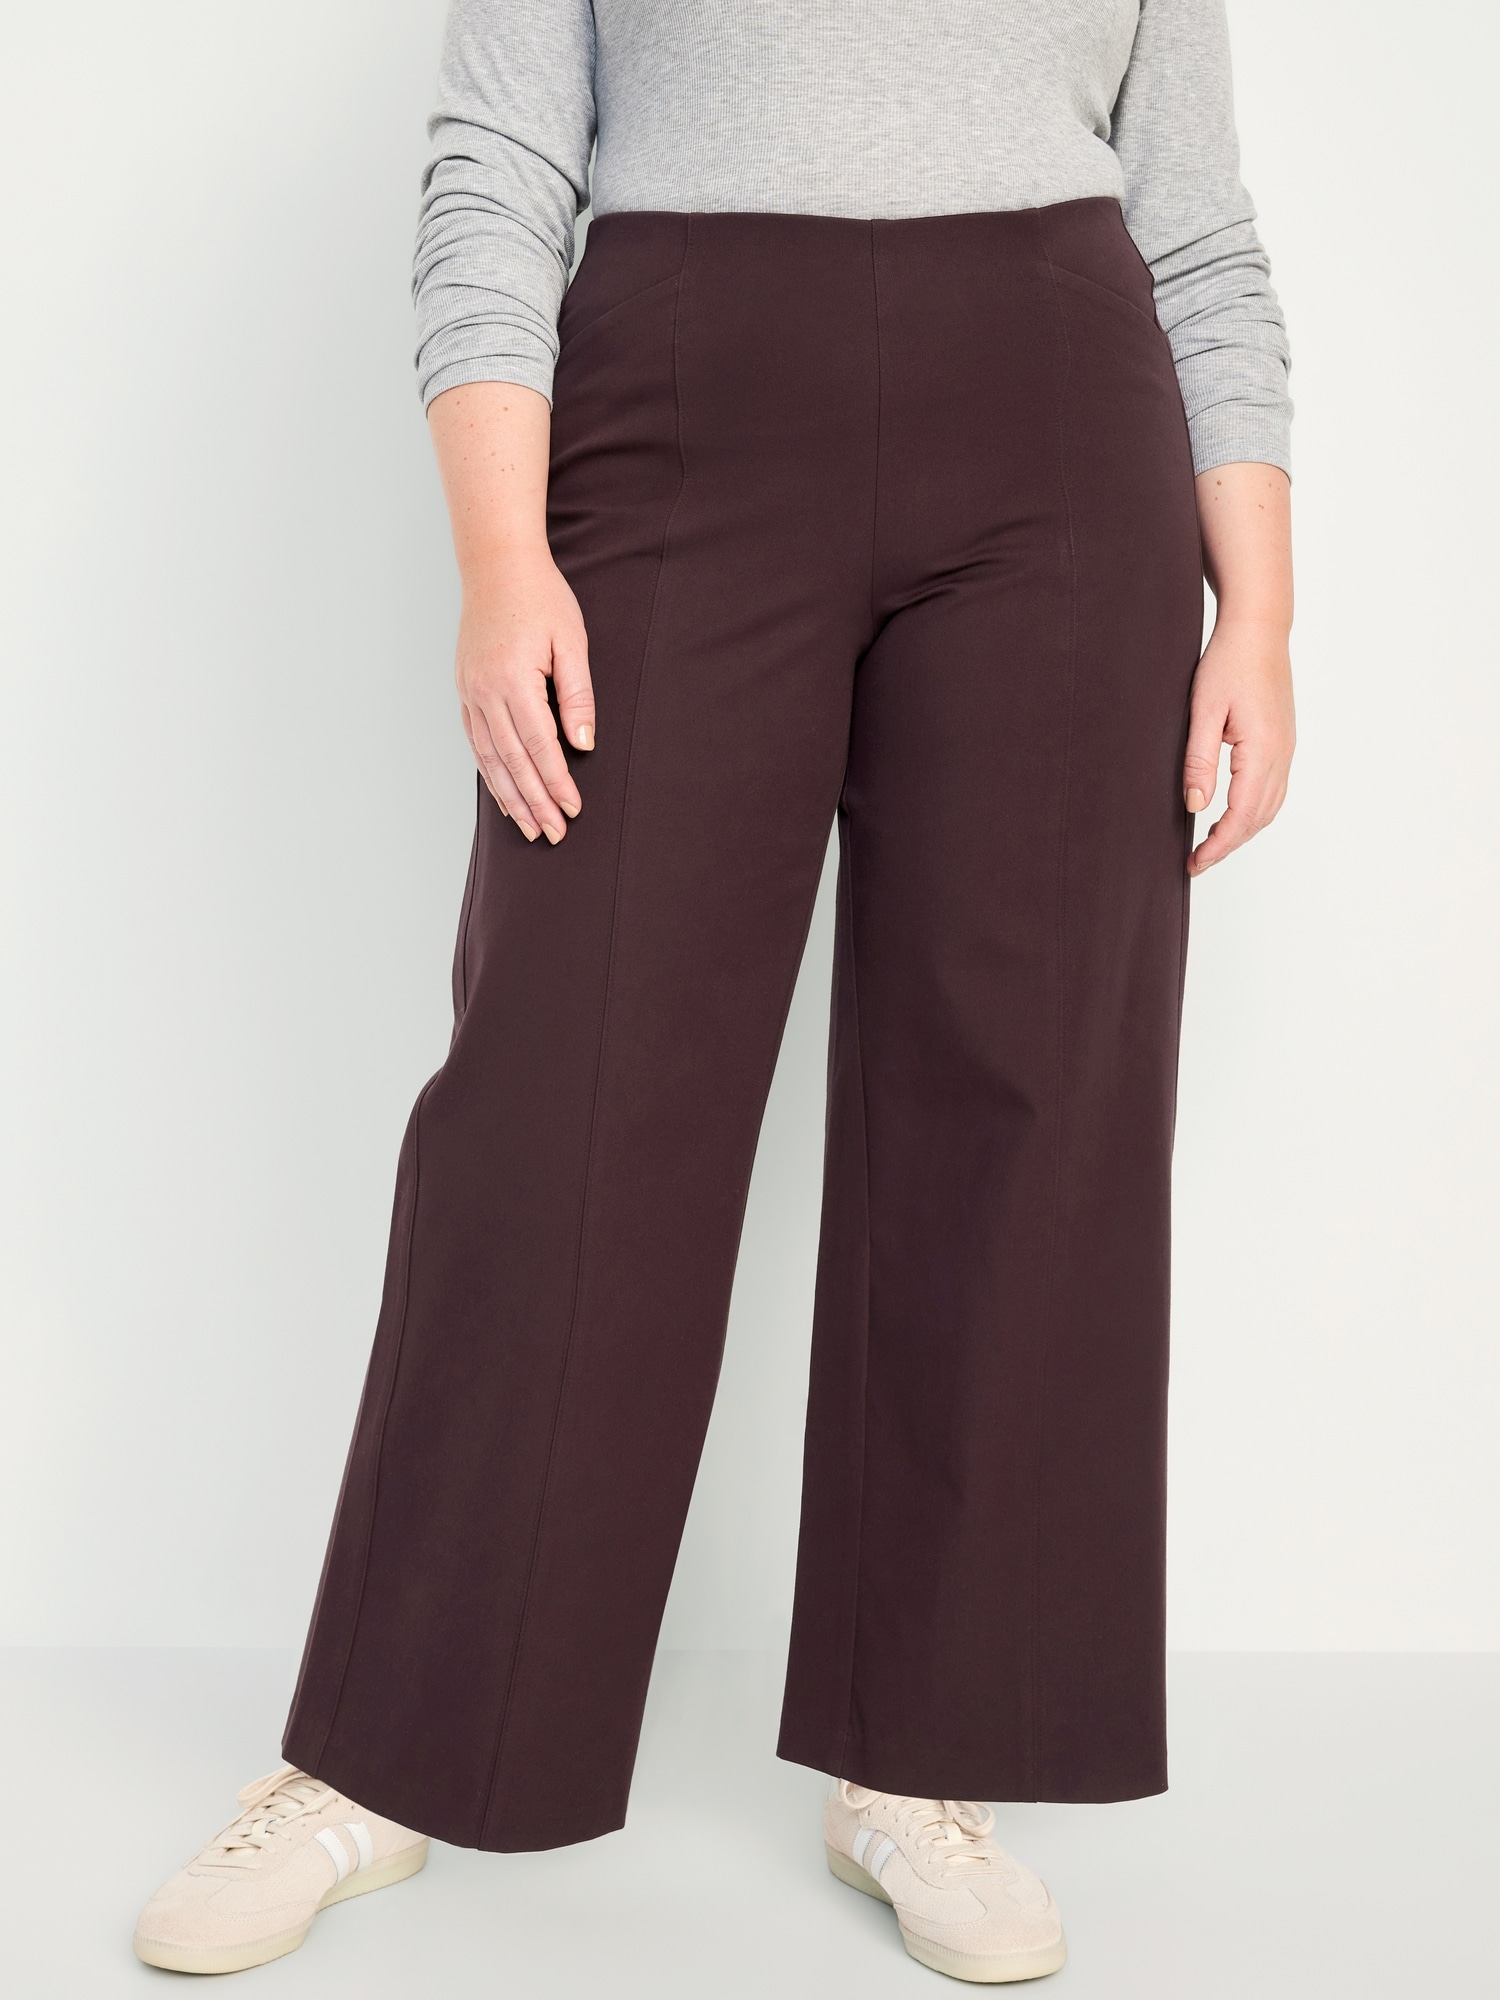 High-Waisted Pull-On Pixie Wide-Leg Pants, Old Navy